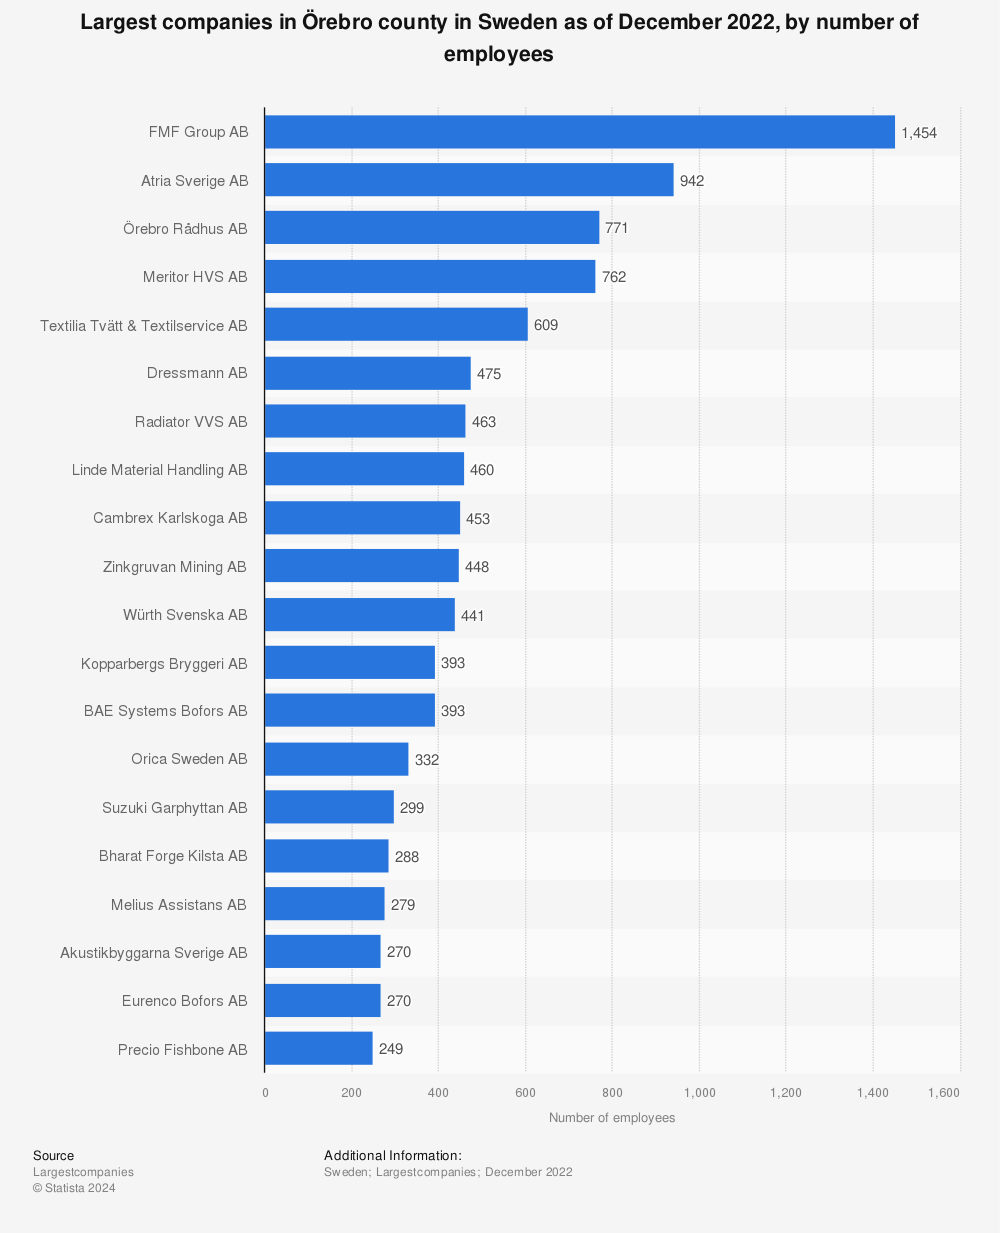 Statistic: Largest companies in Örebro county in Sweden as of December 2022, by number of employees  | Statista